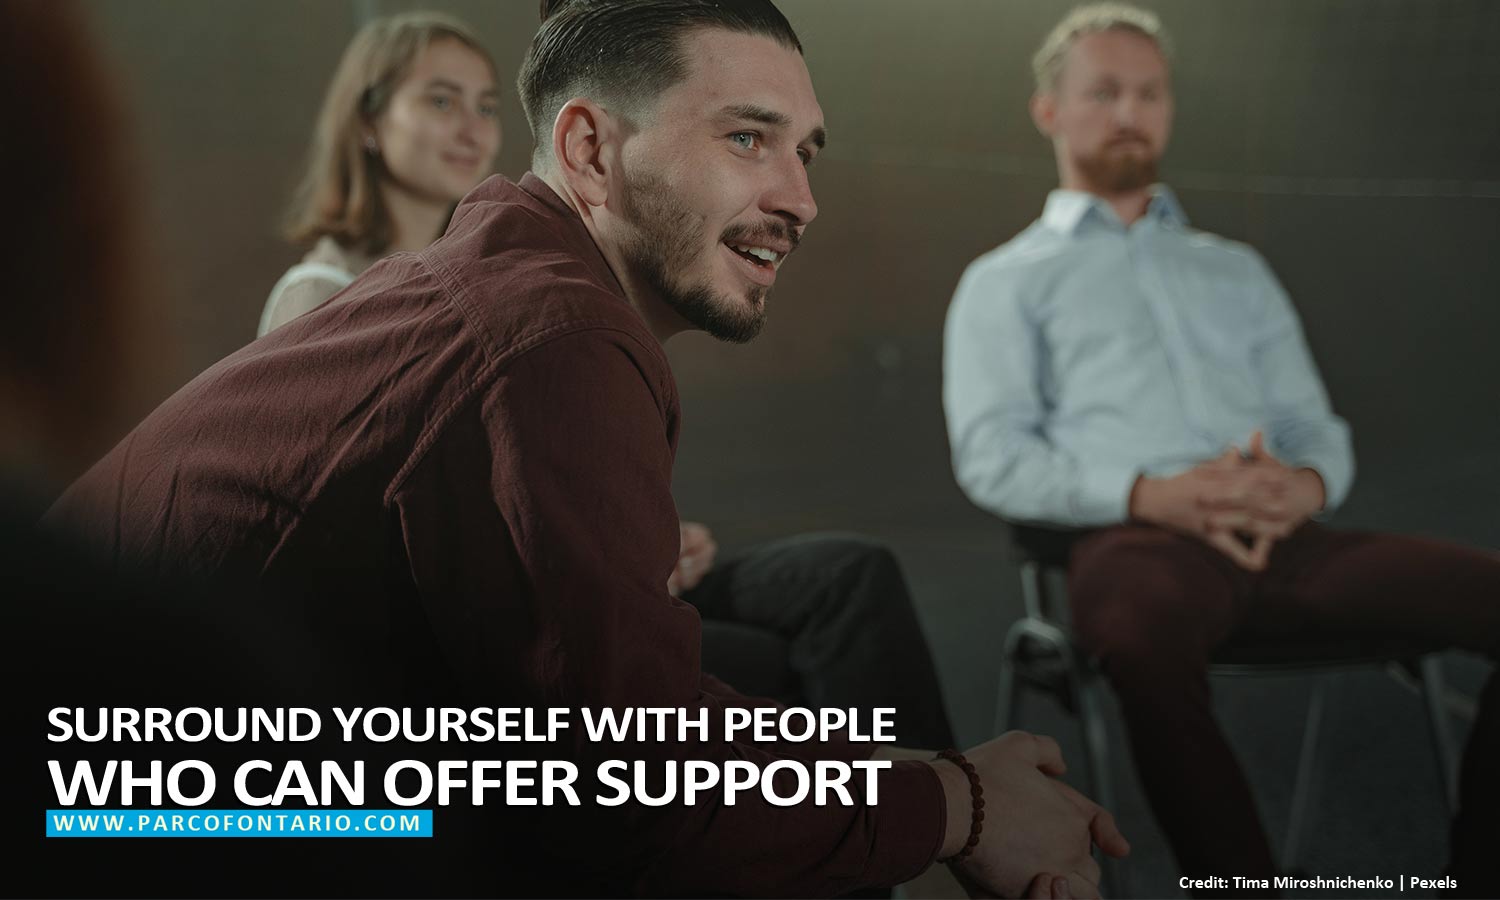 Surround yourself with people who can offer support